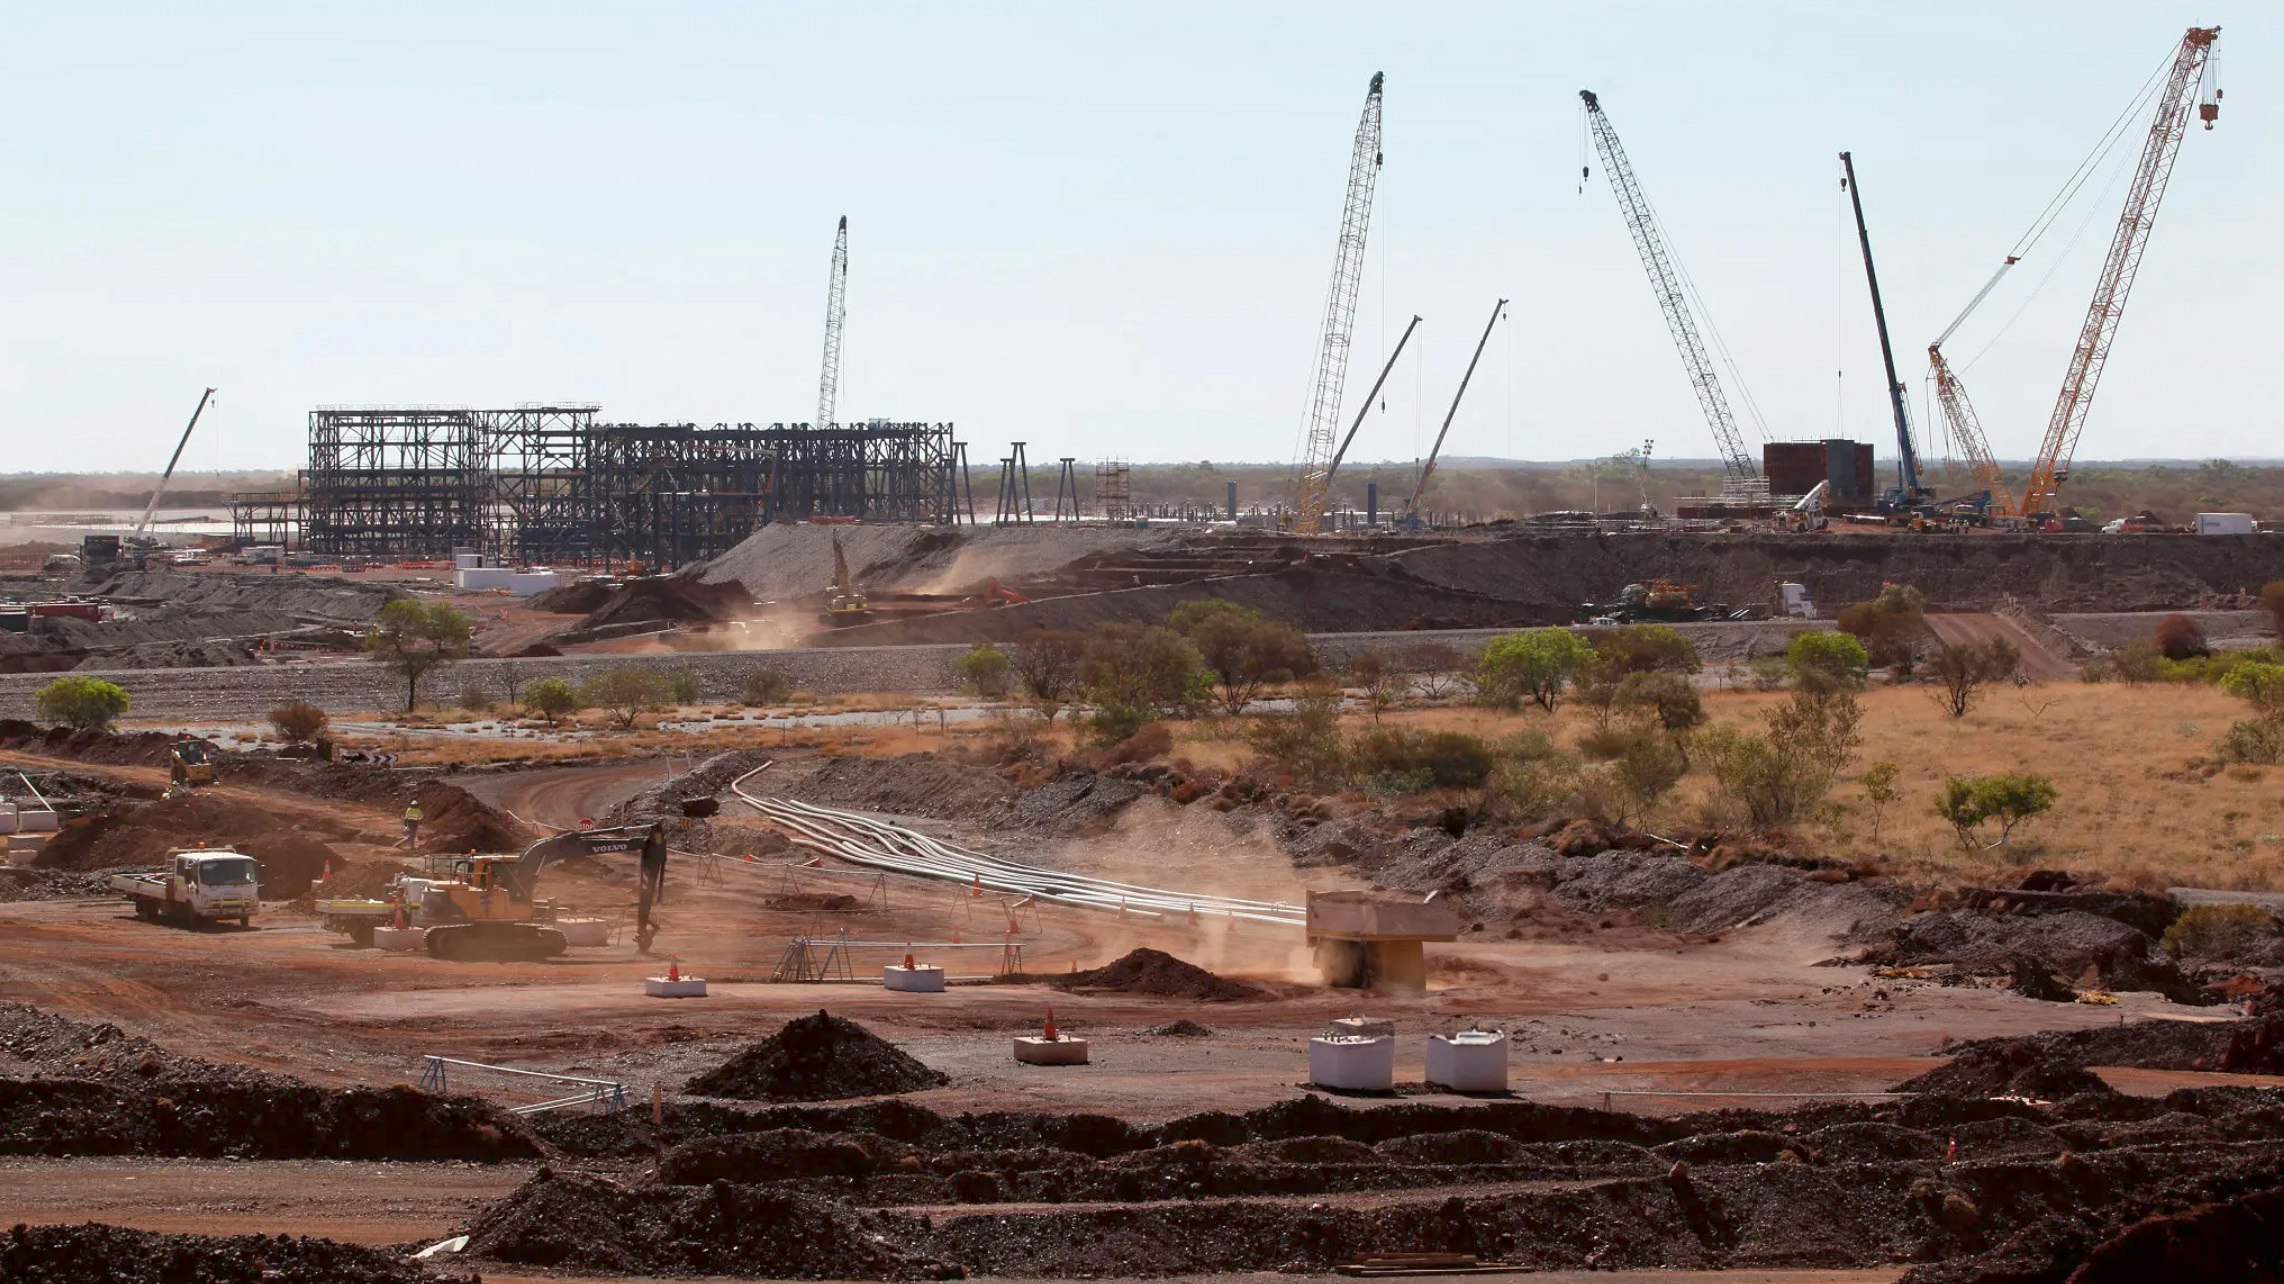 This file photo shows a truck driving through the mine process plant at Hancock Prospecting Ltd.'s Roy Hill Mine operations, under construction in the Pilbara region, western Australia, on Nov. 20, 2014.